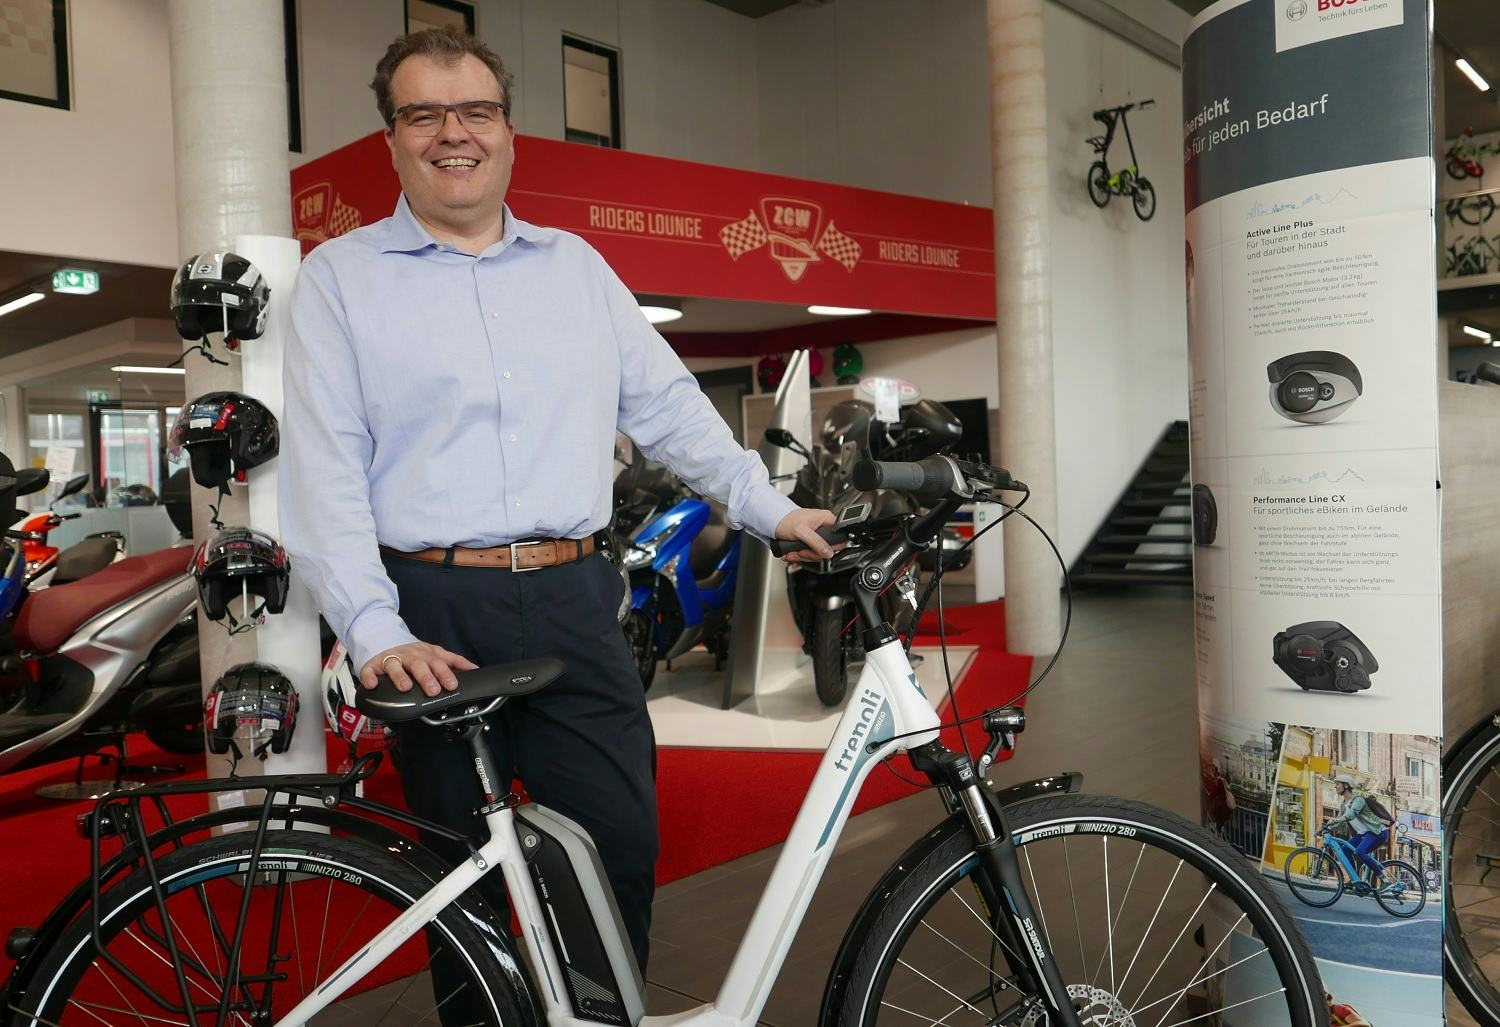 Motor Sport Accessoires GmbH MD Gerald Federl. This major importer of Powered Two-Wheelers invested heavily in its entry in the e-bike market. – Photo Jo Beckendorff 